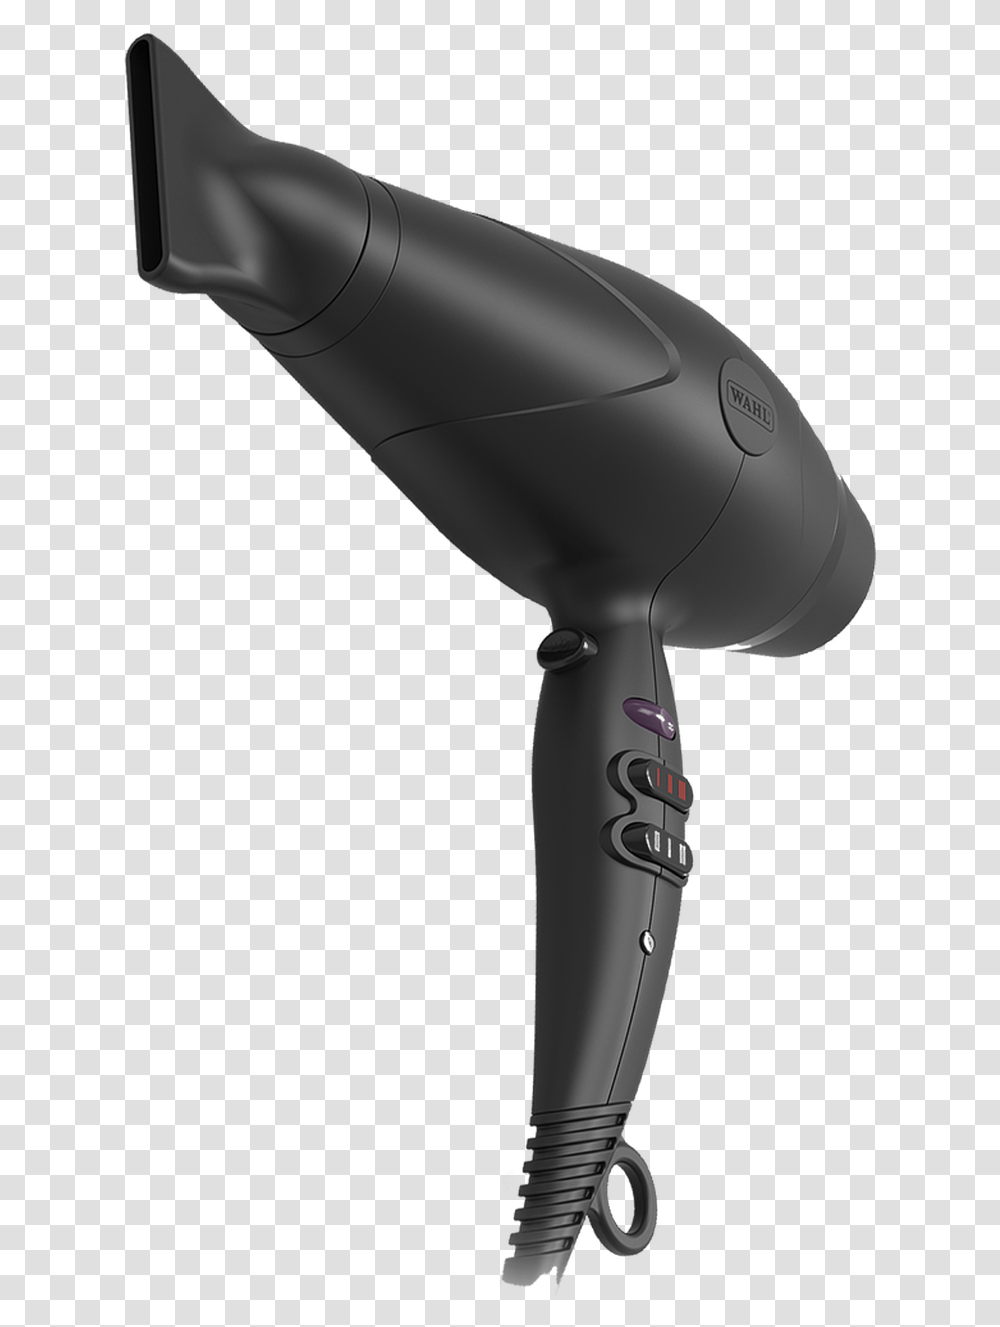 Wahl Style Collection Hair Dryer Hair Dryer, Blow Dryer, Appliance, Hair Drier Transparent Png